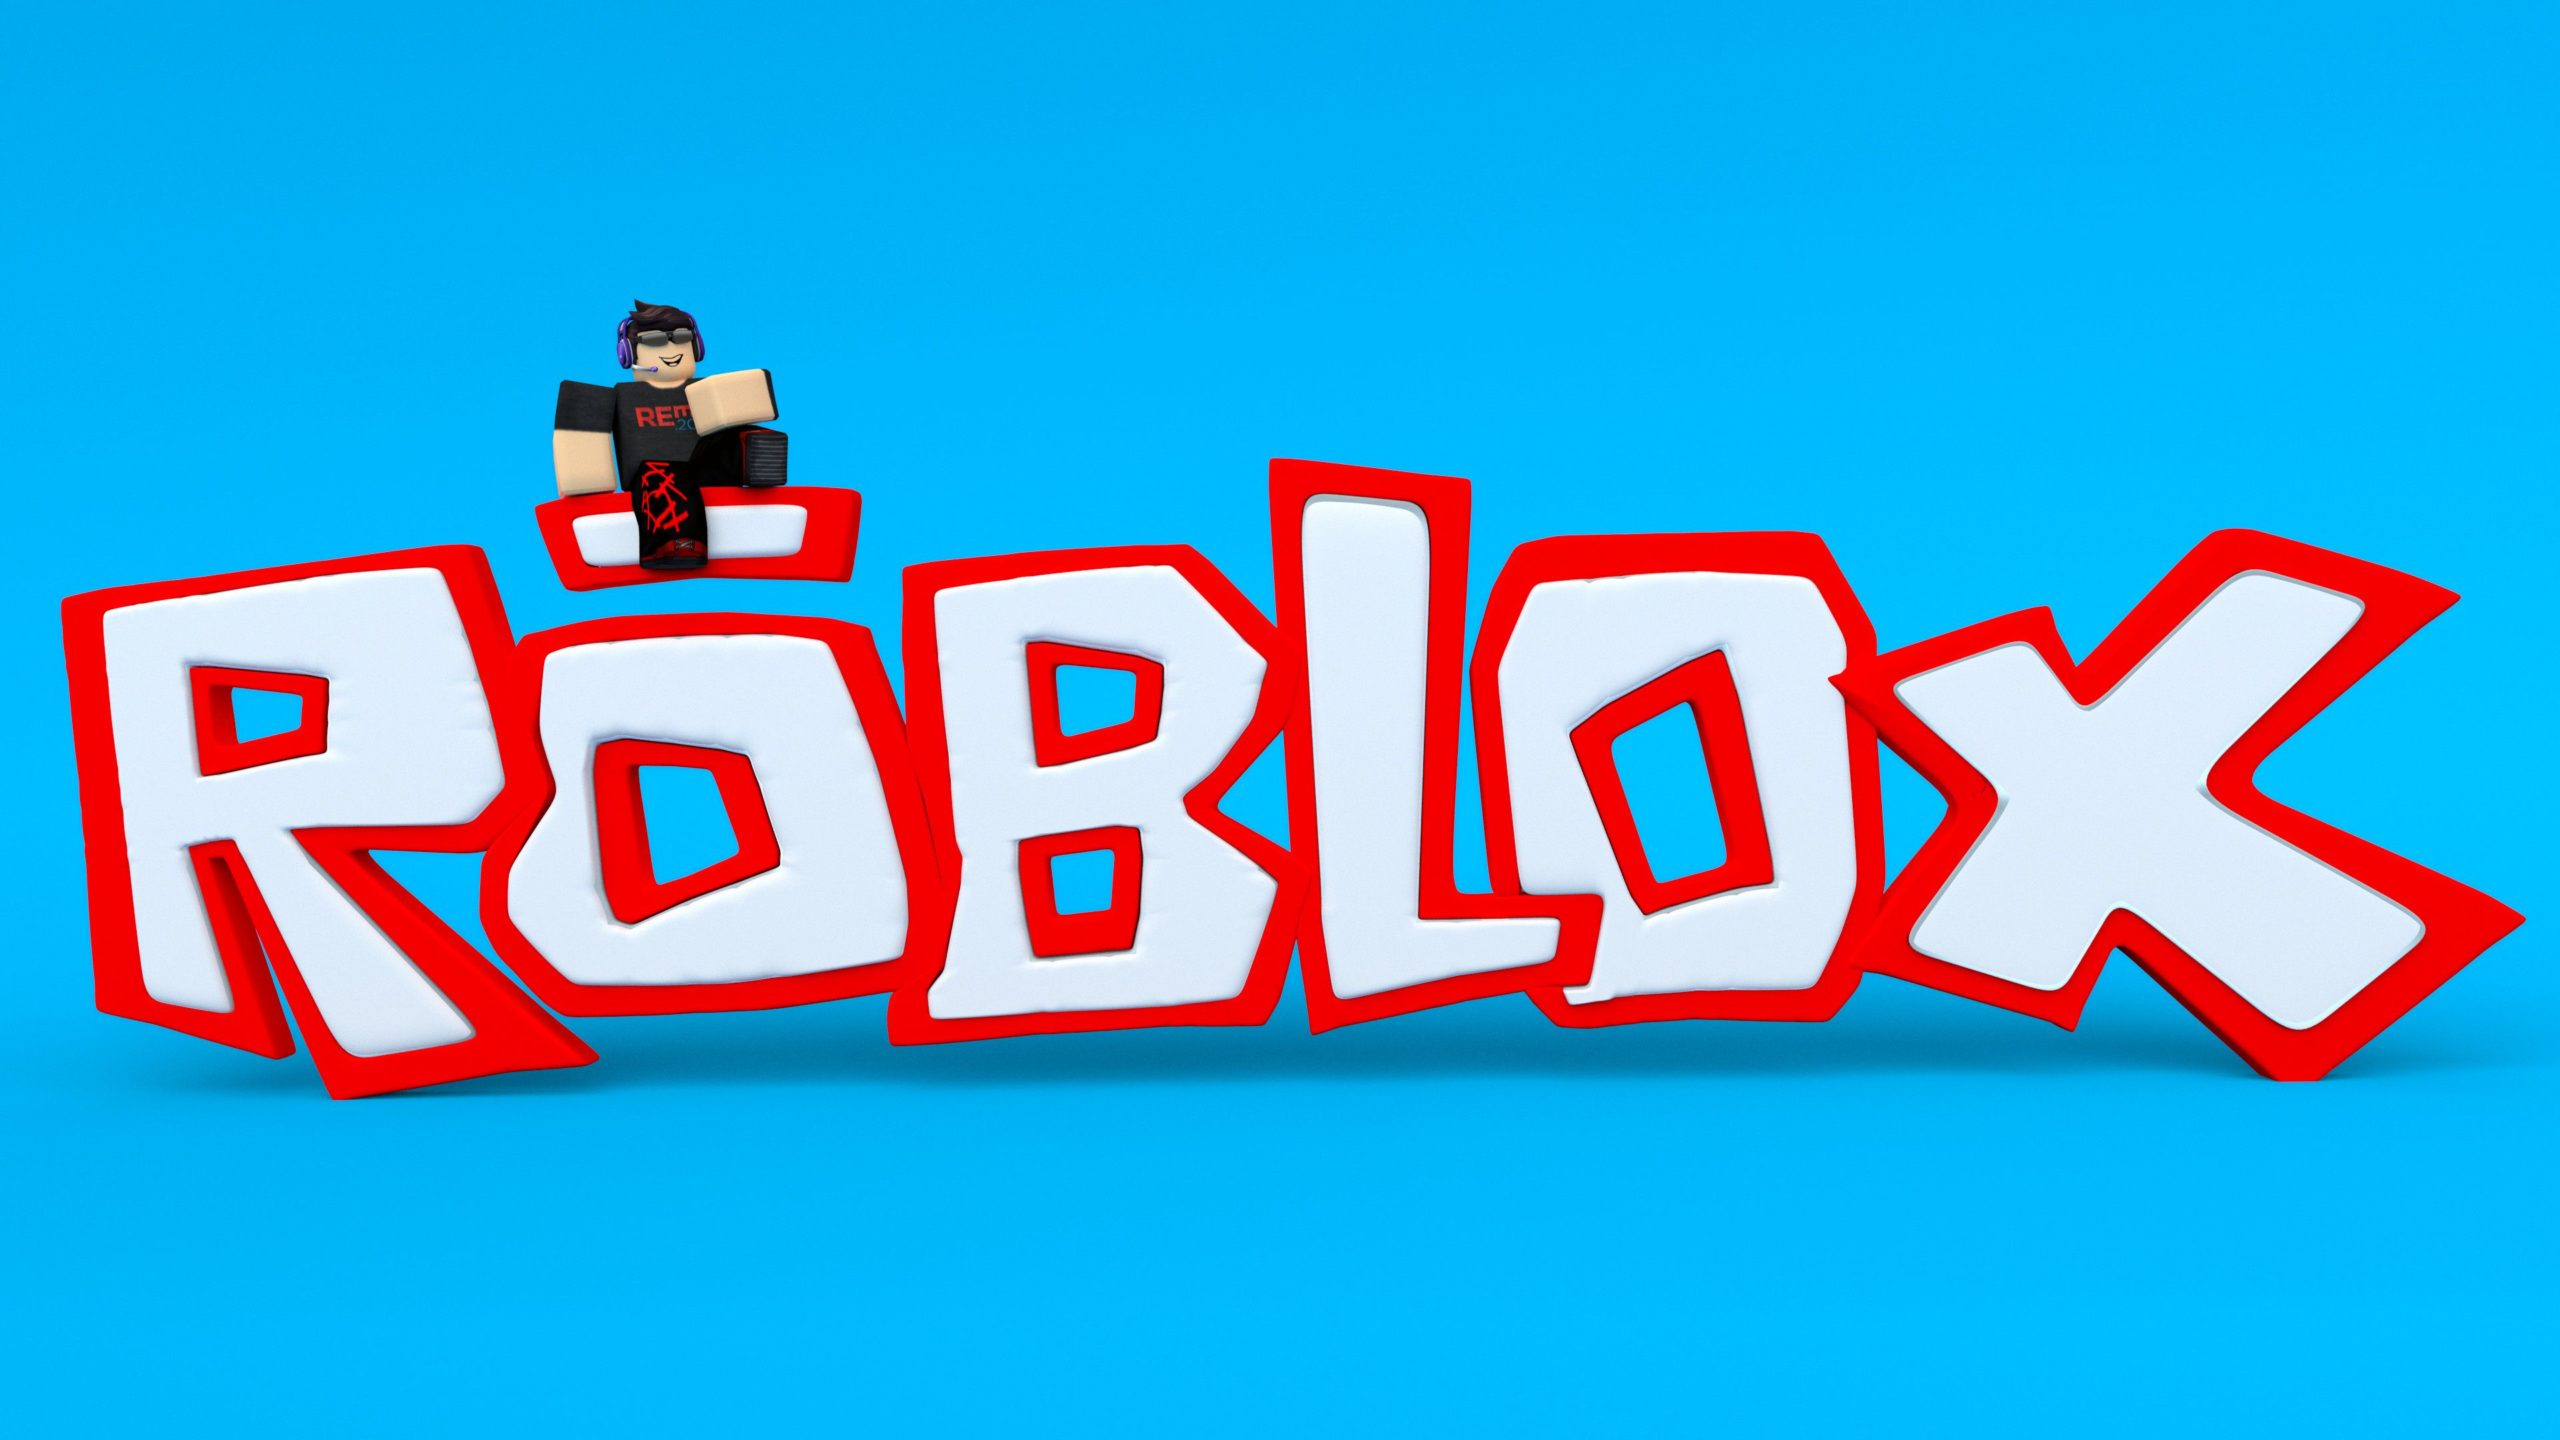 Free Download Roblox Wallpapers Trumpwallpapers 2560x1440 For Your Desktop Mobile Tablet Explore 22 Roblox Background Roblox Wallpaper Creator Roblox Oof Wallpapers Roblox Dominus Wallpapers - roblox tablet requirements